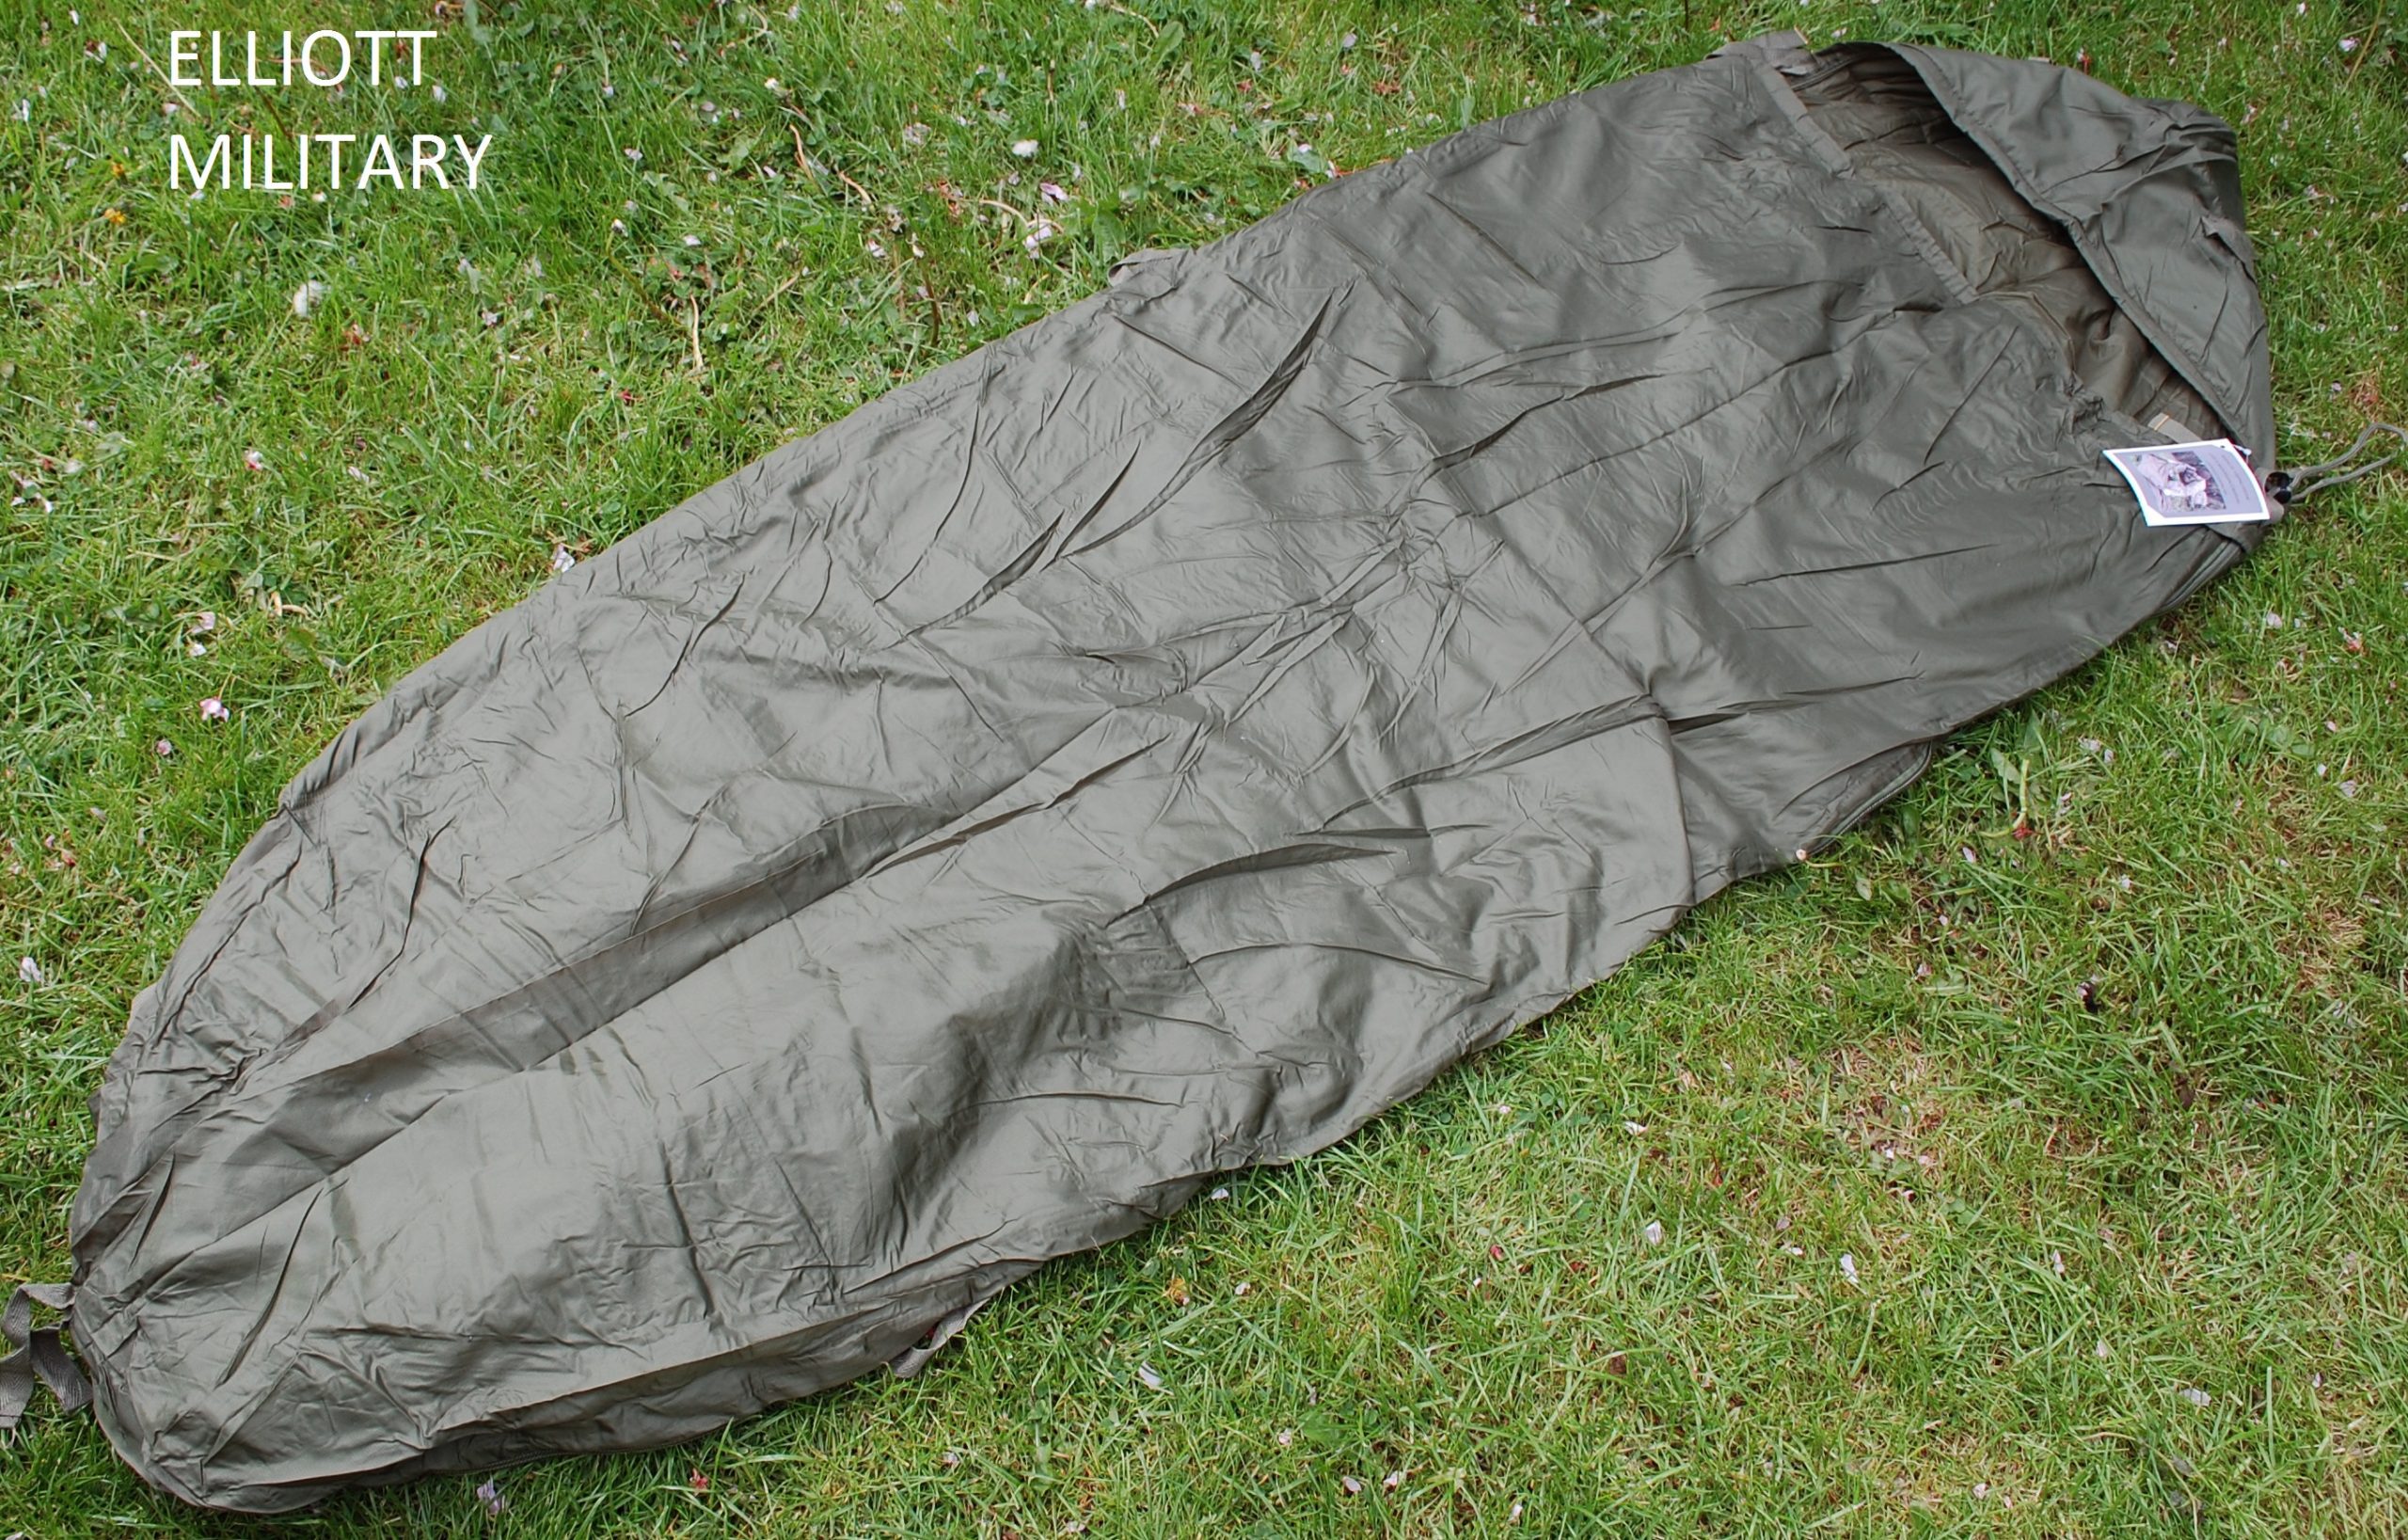 How to Choose the Best Backpacking Sleeping Bag | REI Expert Advice